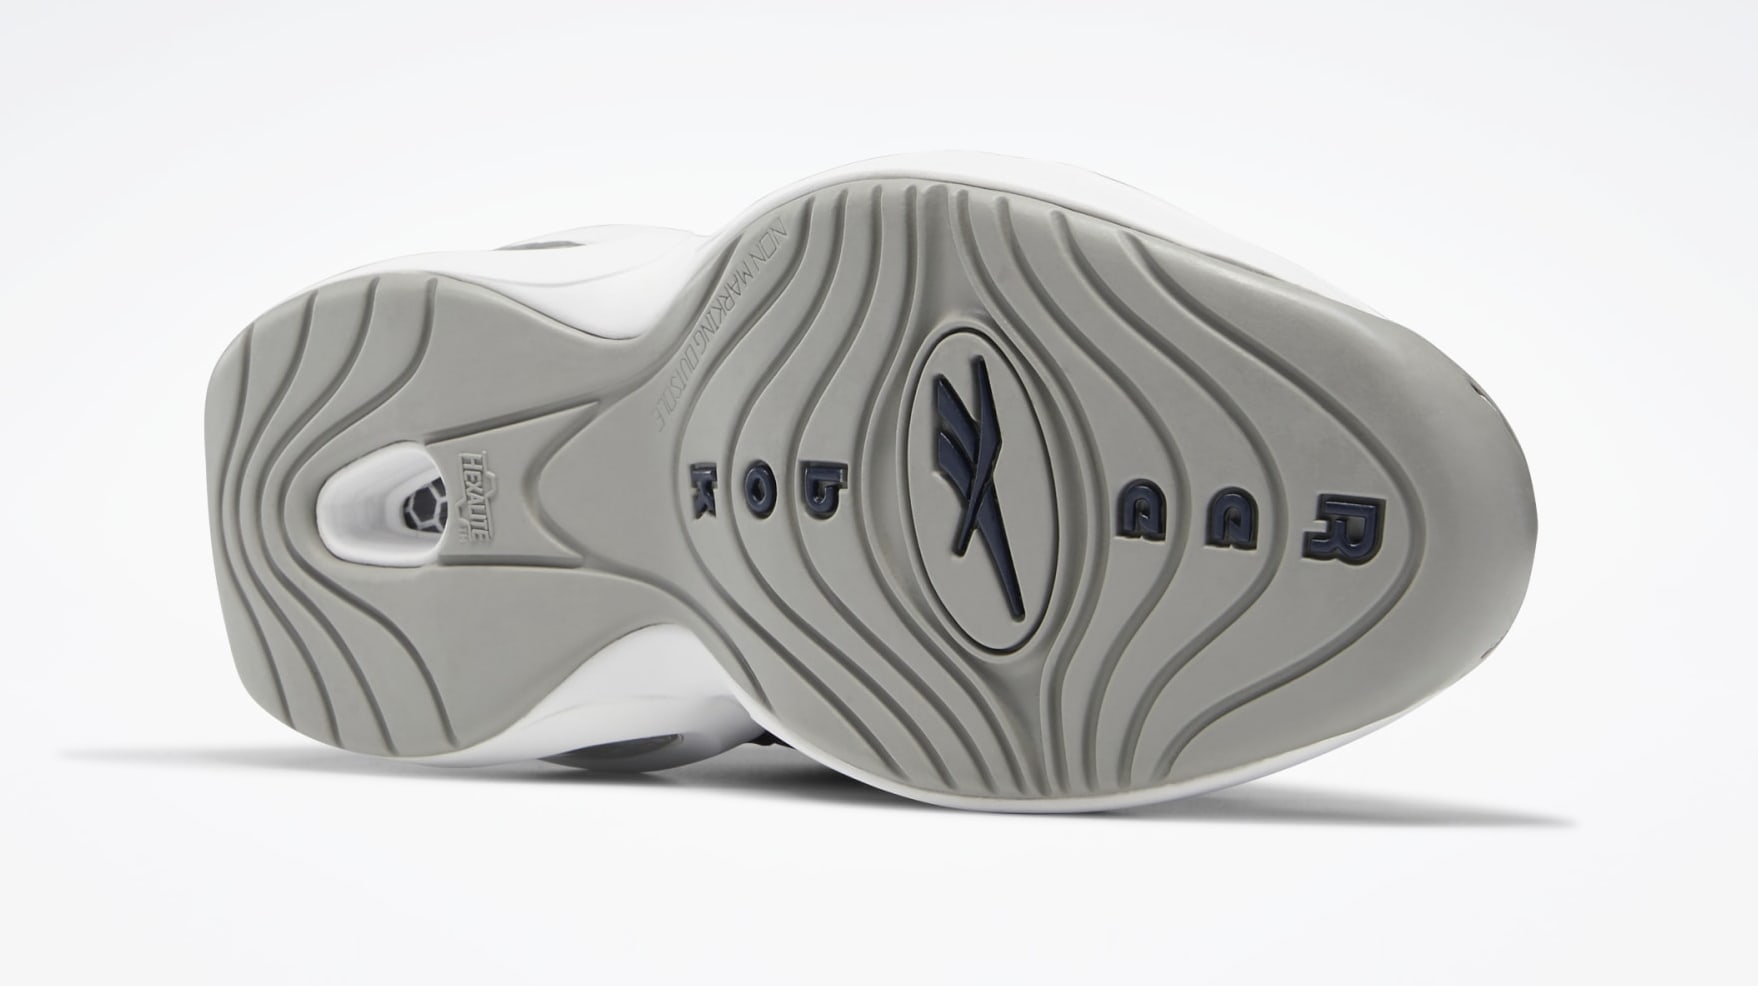 reebok-question-mid-georgetown-fx0987-outsole